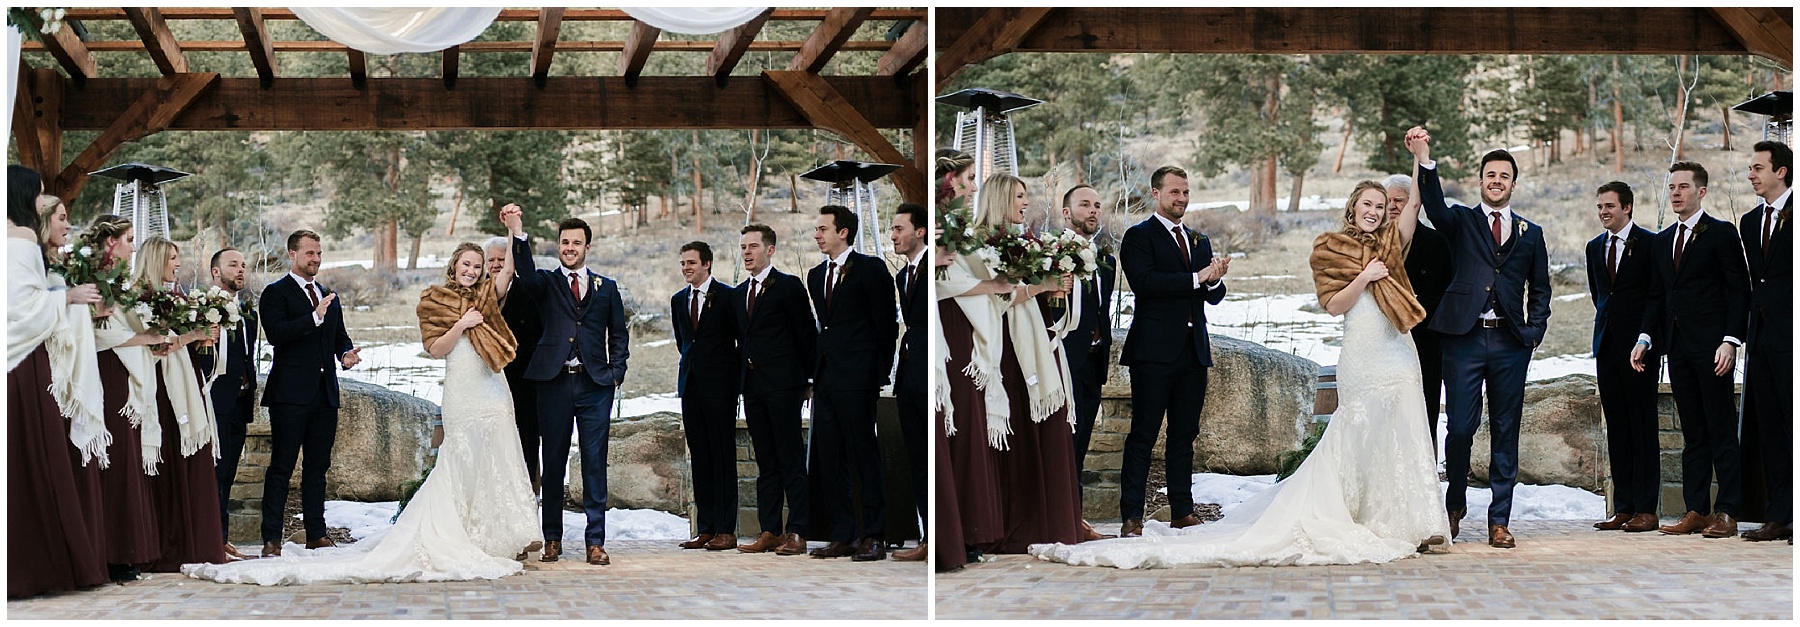 Katesalleyphotography-442_Haley and Dan get married in Estes Park.jpg